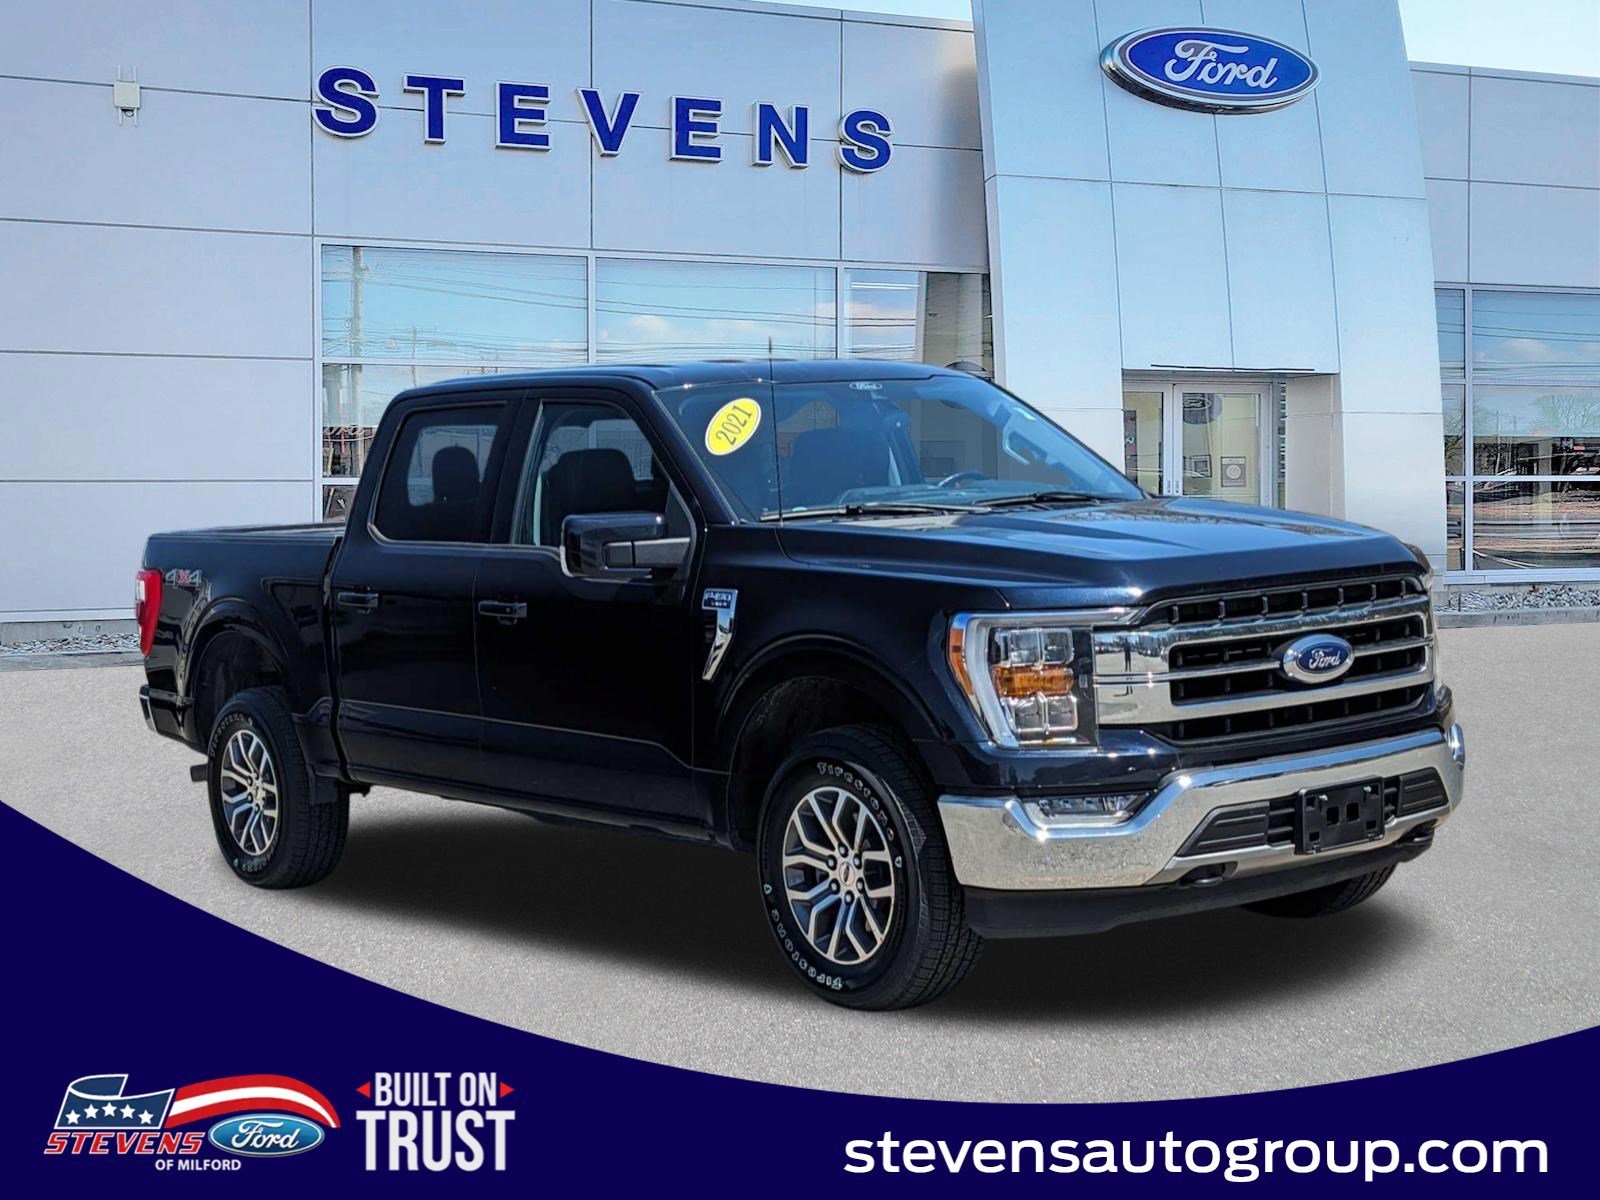 2021 Ford F-150 Milford CT